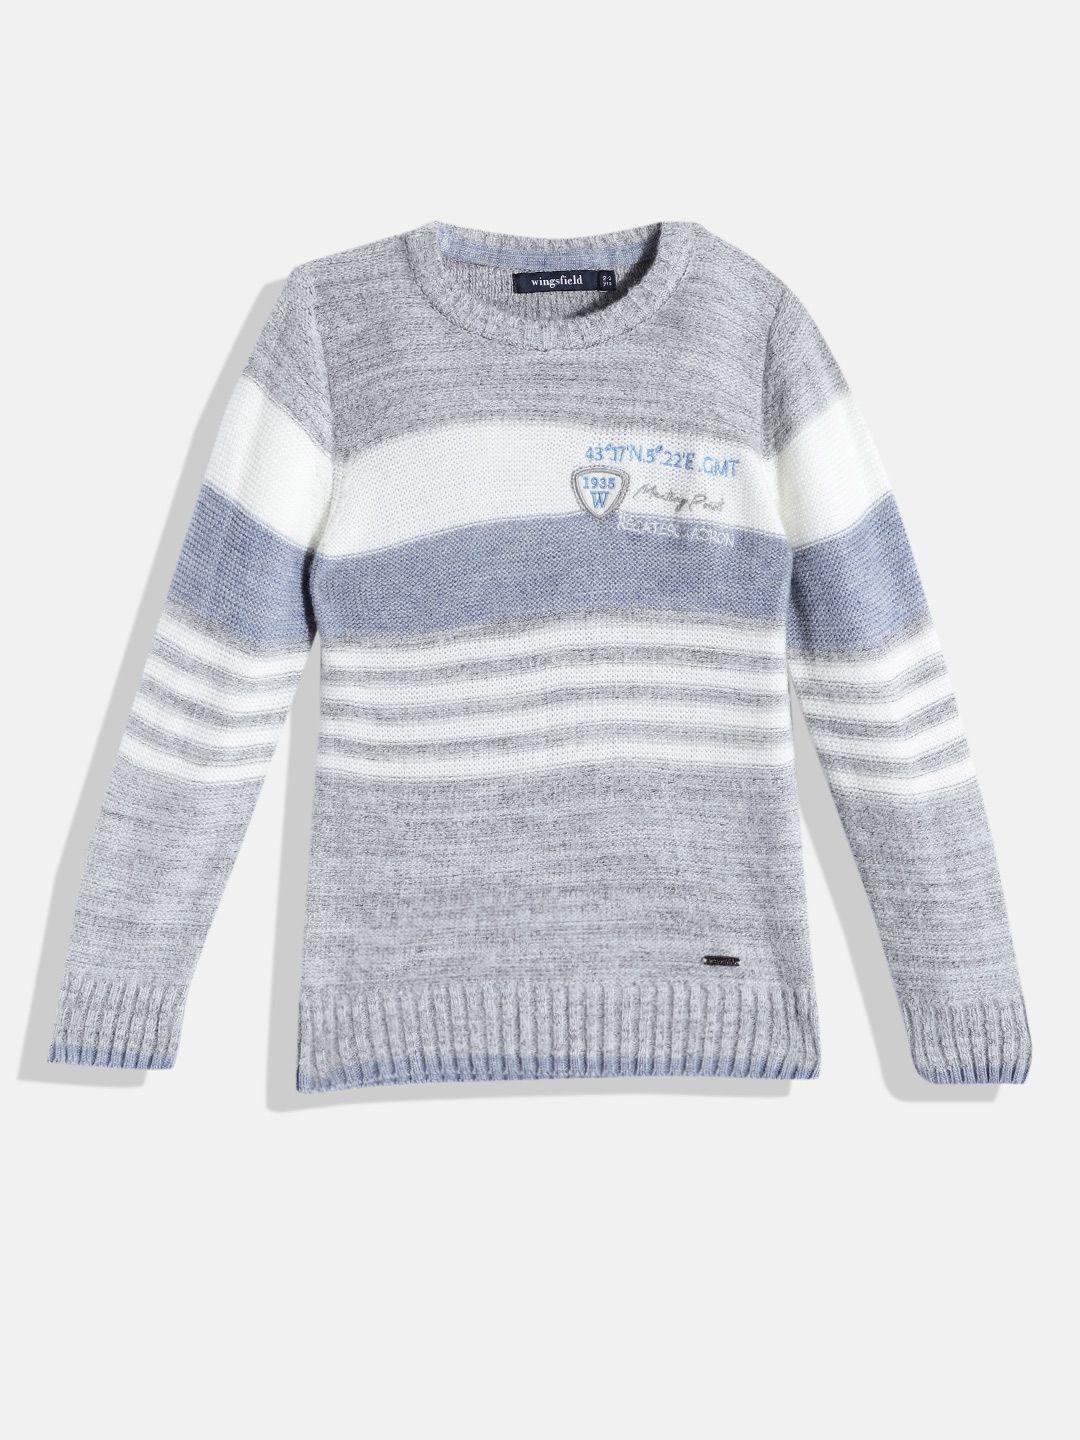 wingsfield boys grey & white striped acrylic pullover